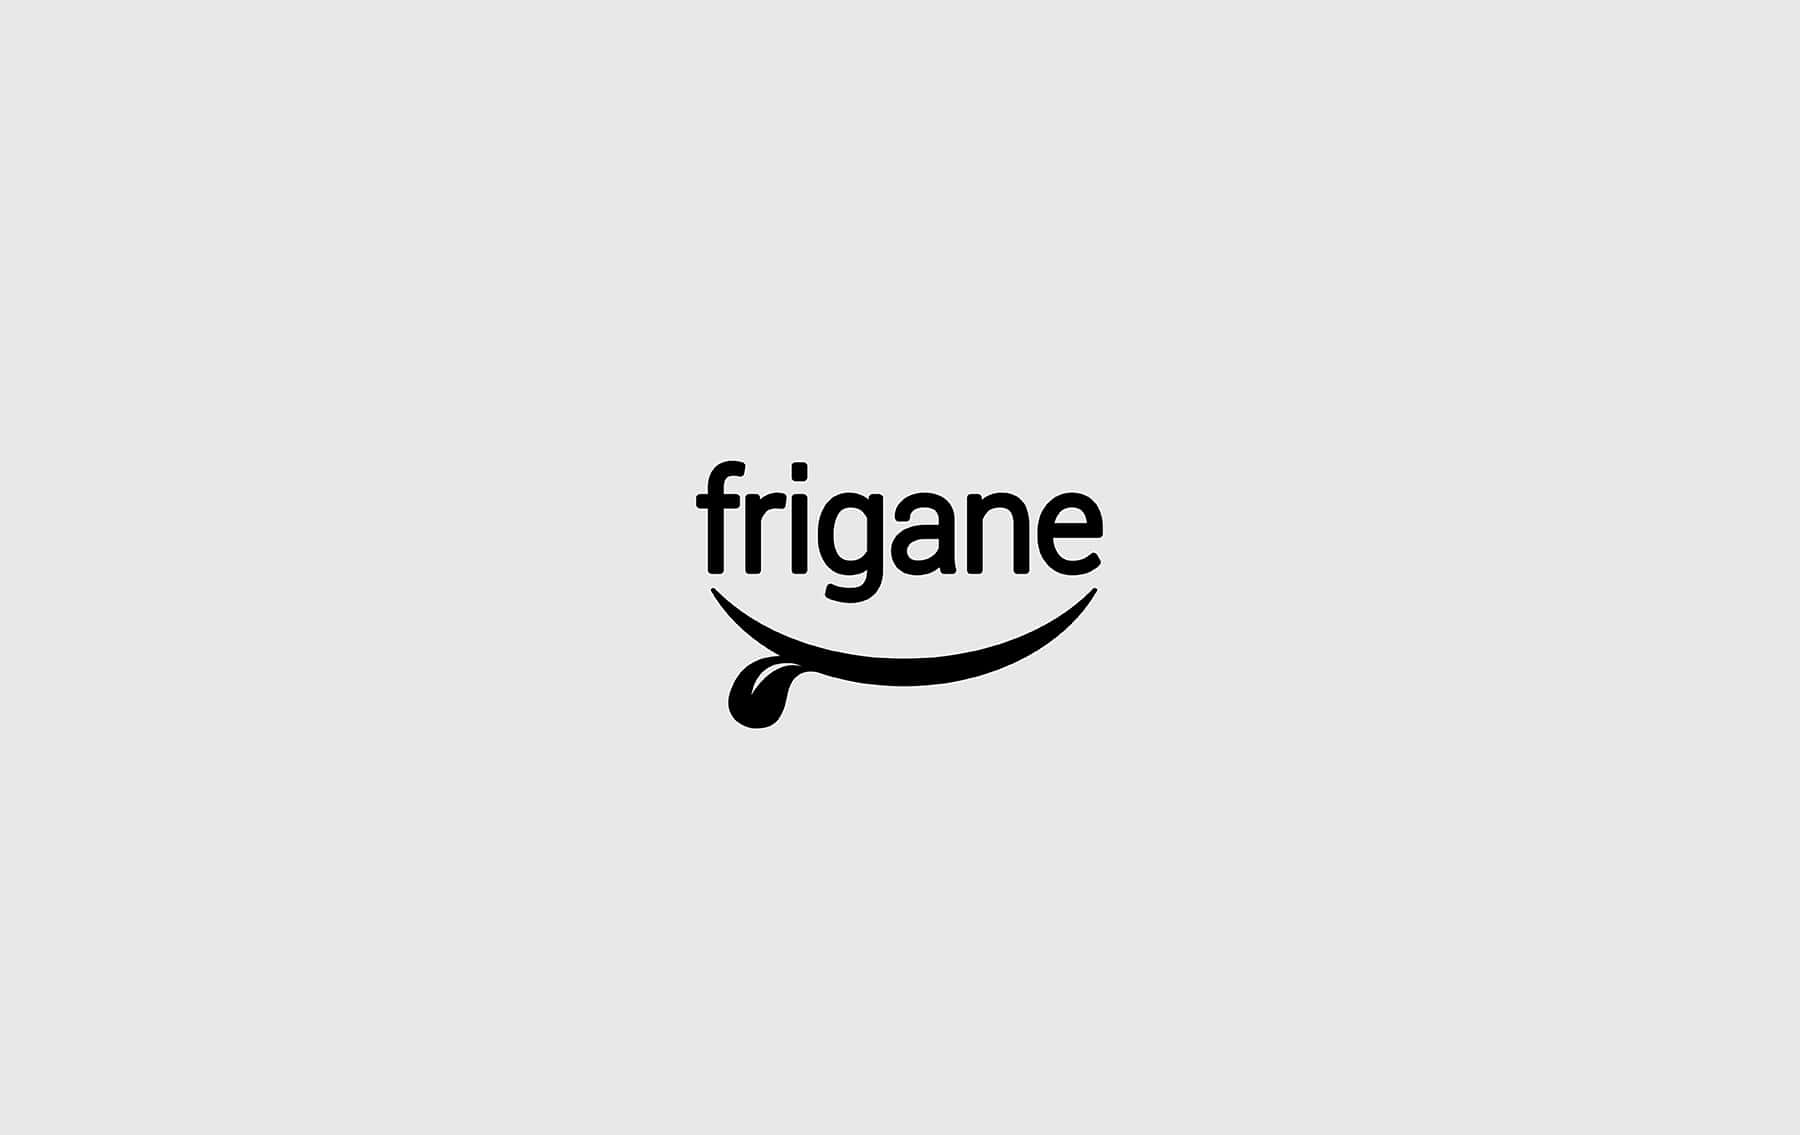 Brohouse Creates New Branding And Packaging Design For “frigane” Frozen Products